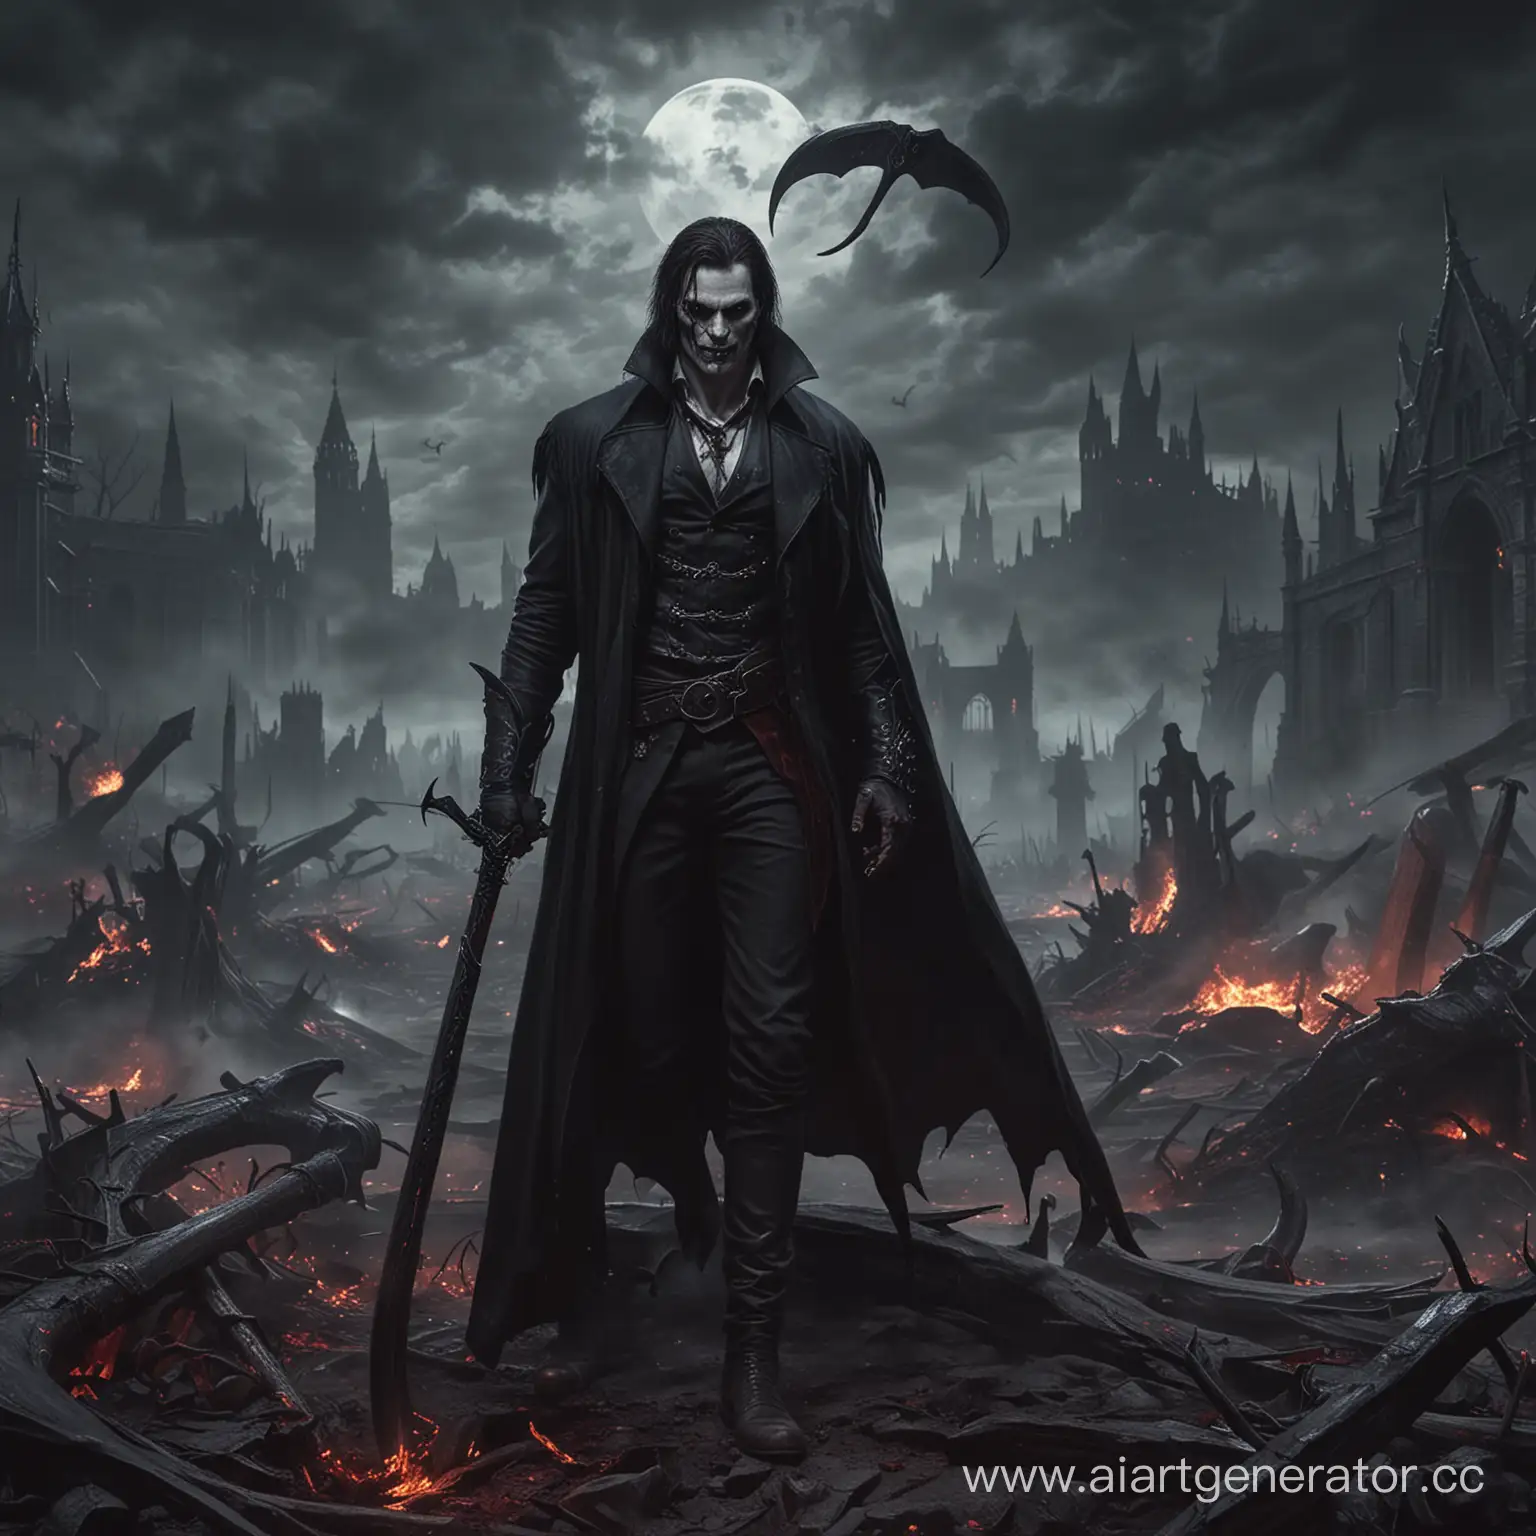 Vampire-in-a-Gothic-Hellscape-Holding-a-Scythe